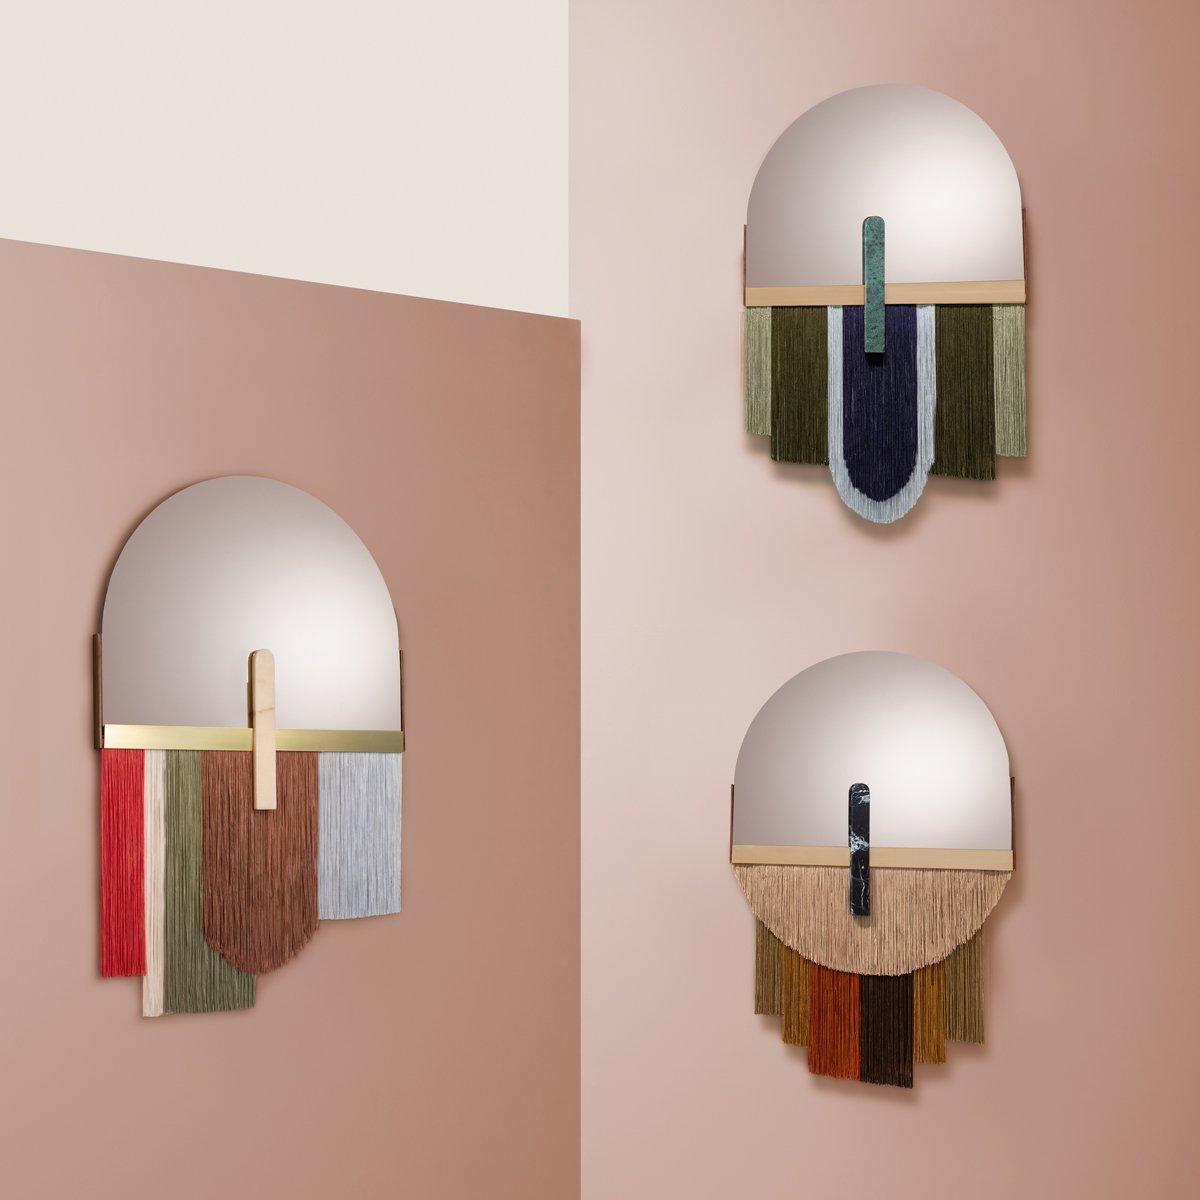 Ensemble of Three Colorful Wall Mirrors by Dooq 5